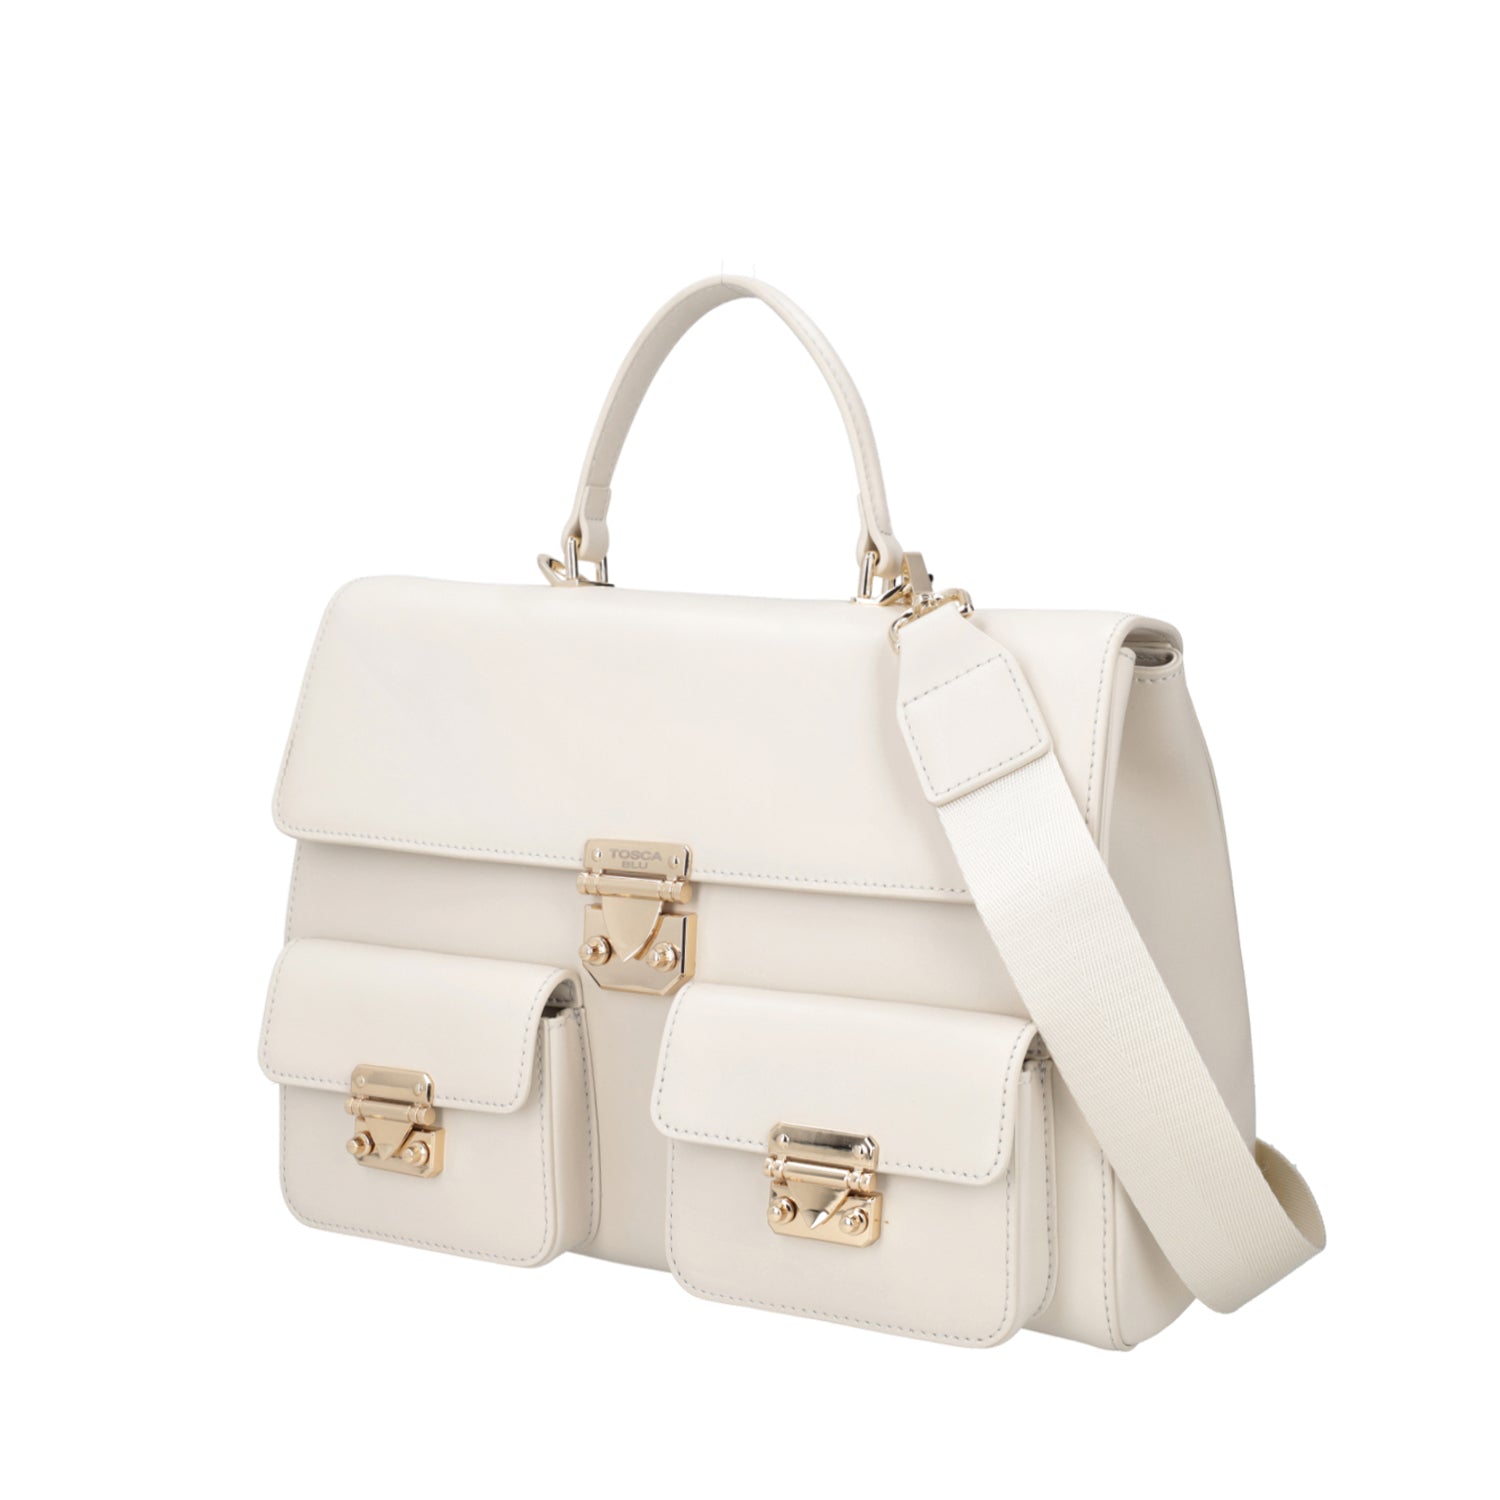 IVORY ANEMONE HAND BAG WITH FABRIC SHOULDER STRAP